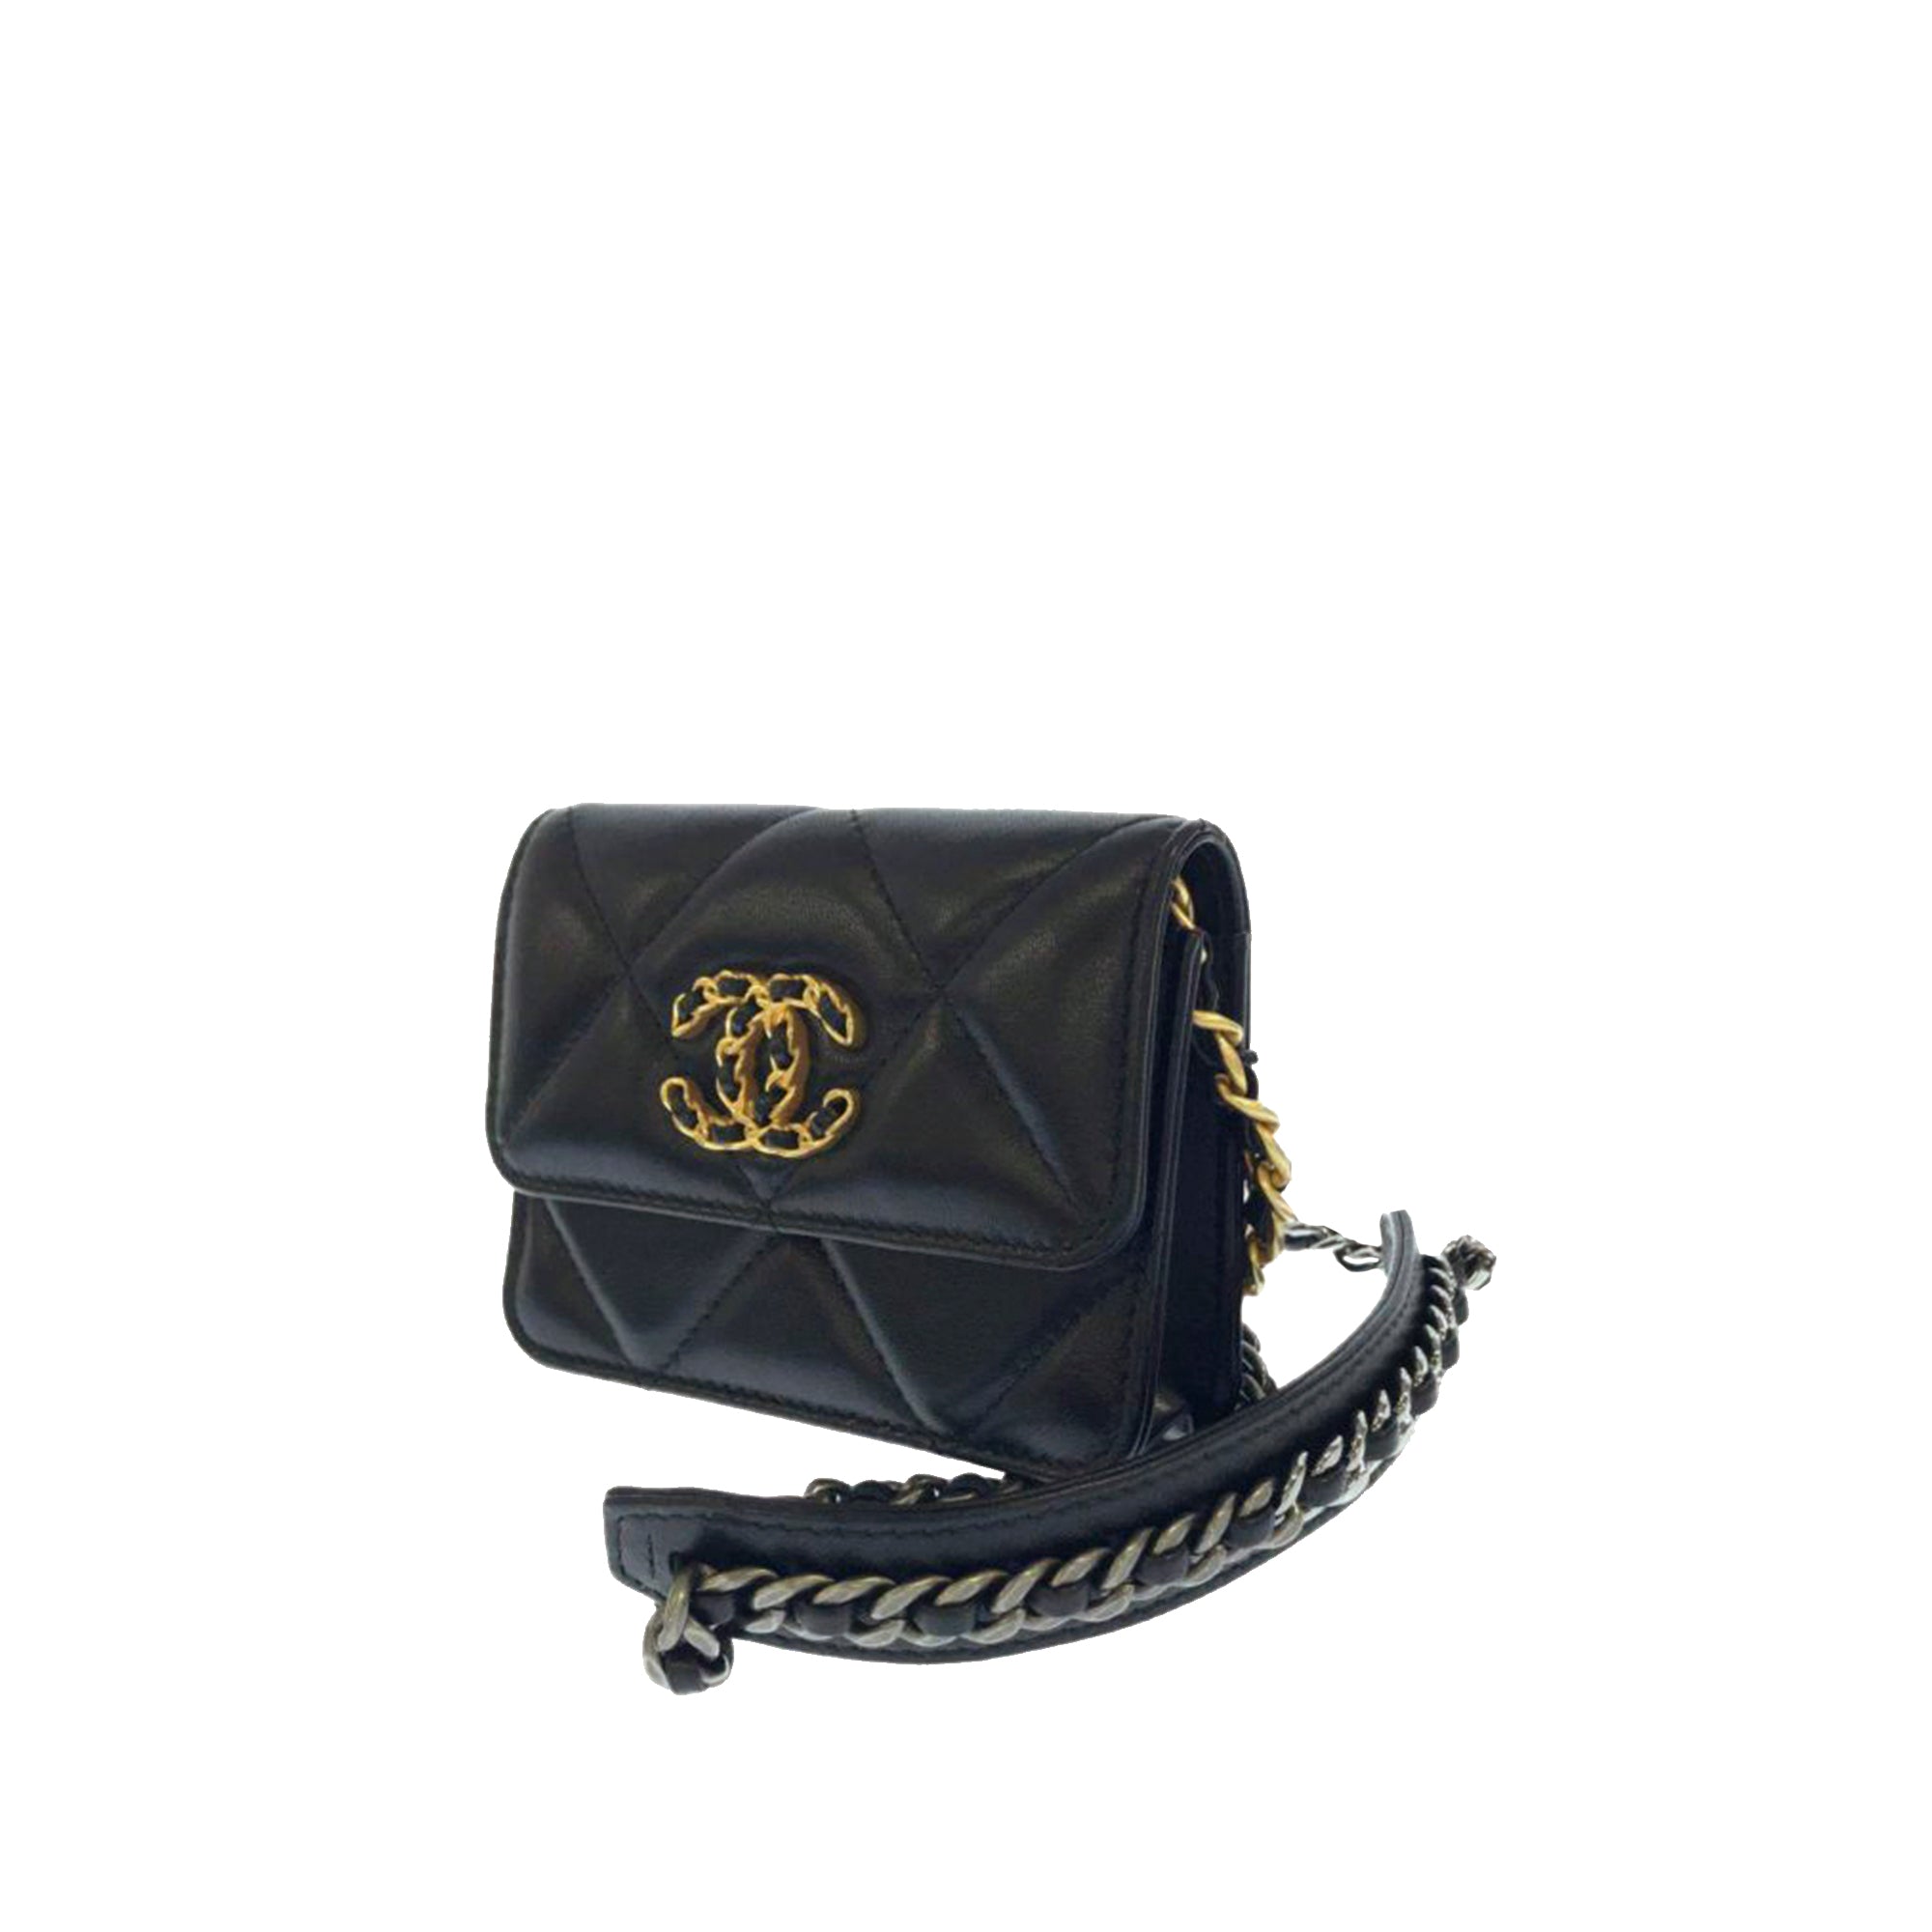 Chanel 19 Small Flap Wallet Black - NOBLEMARS